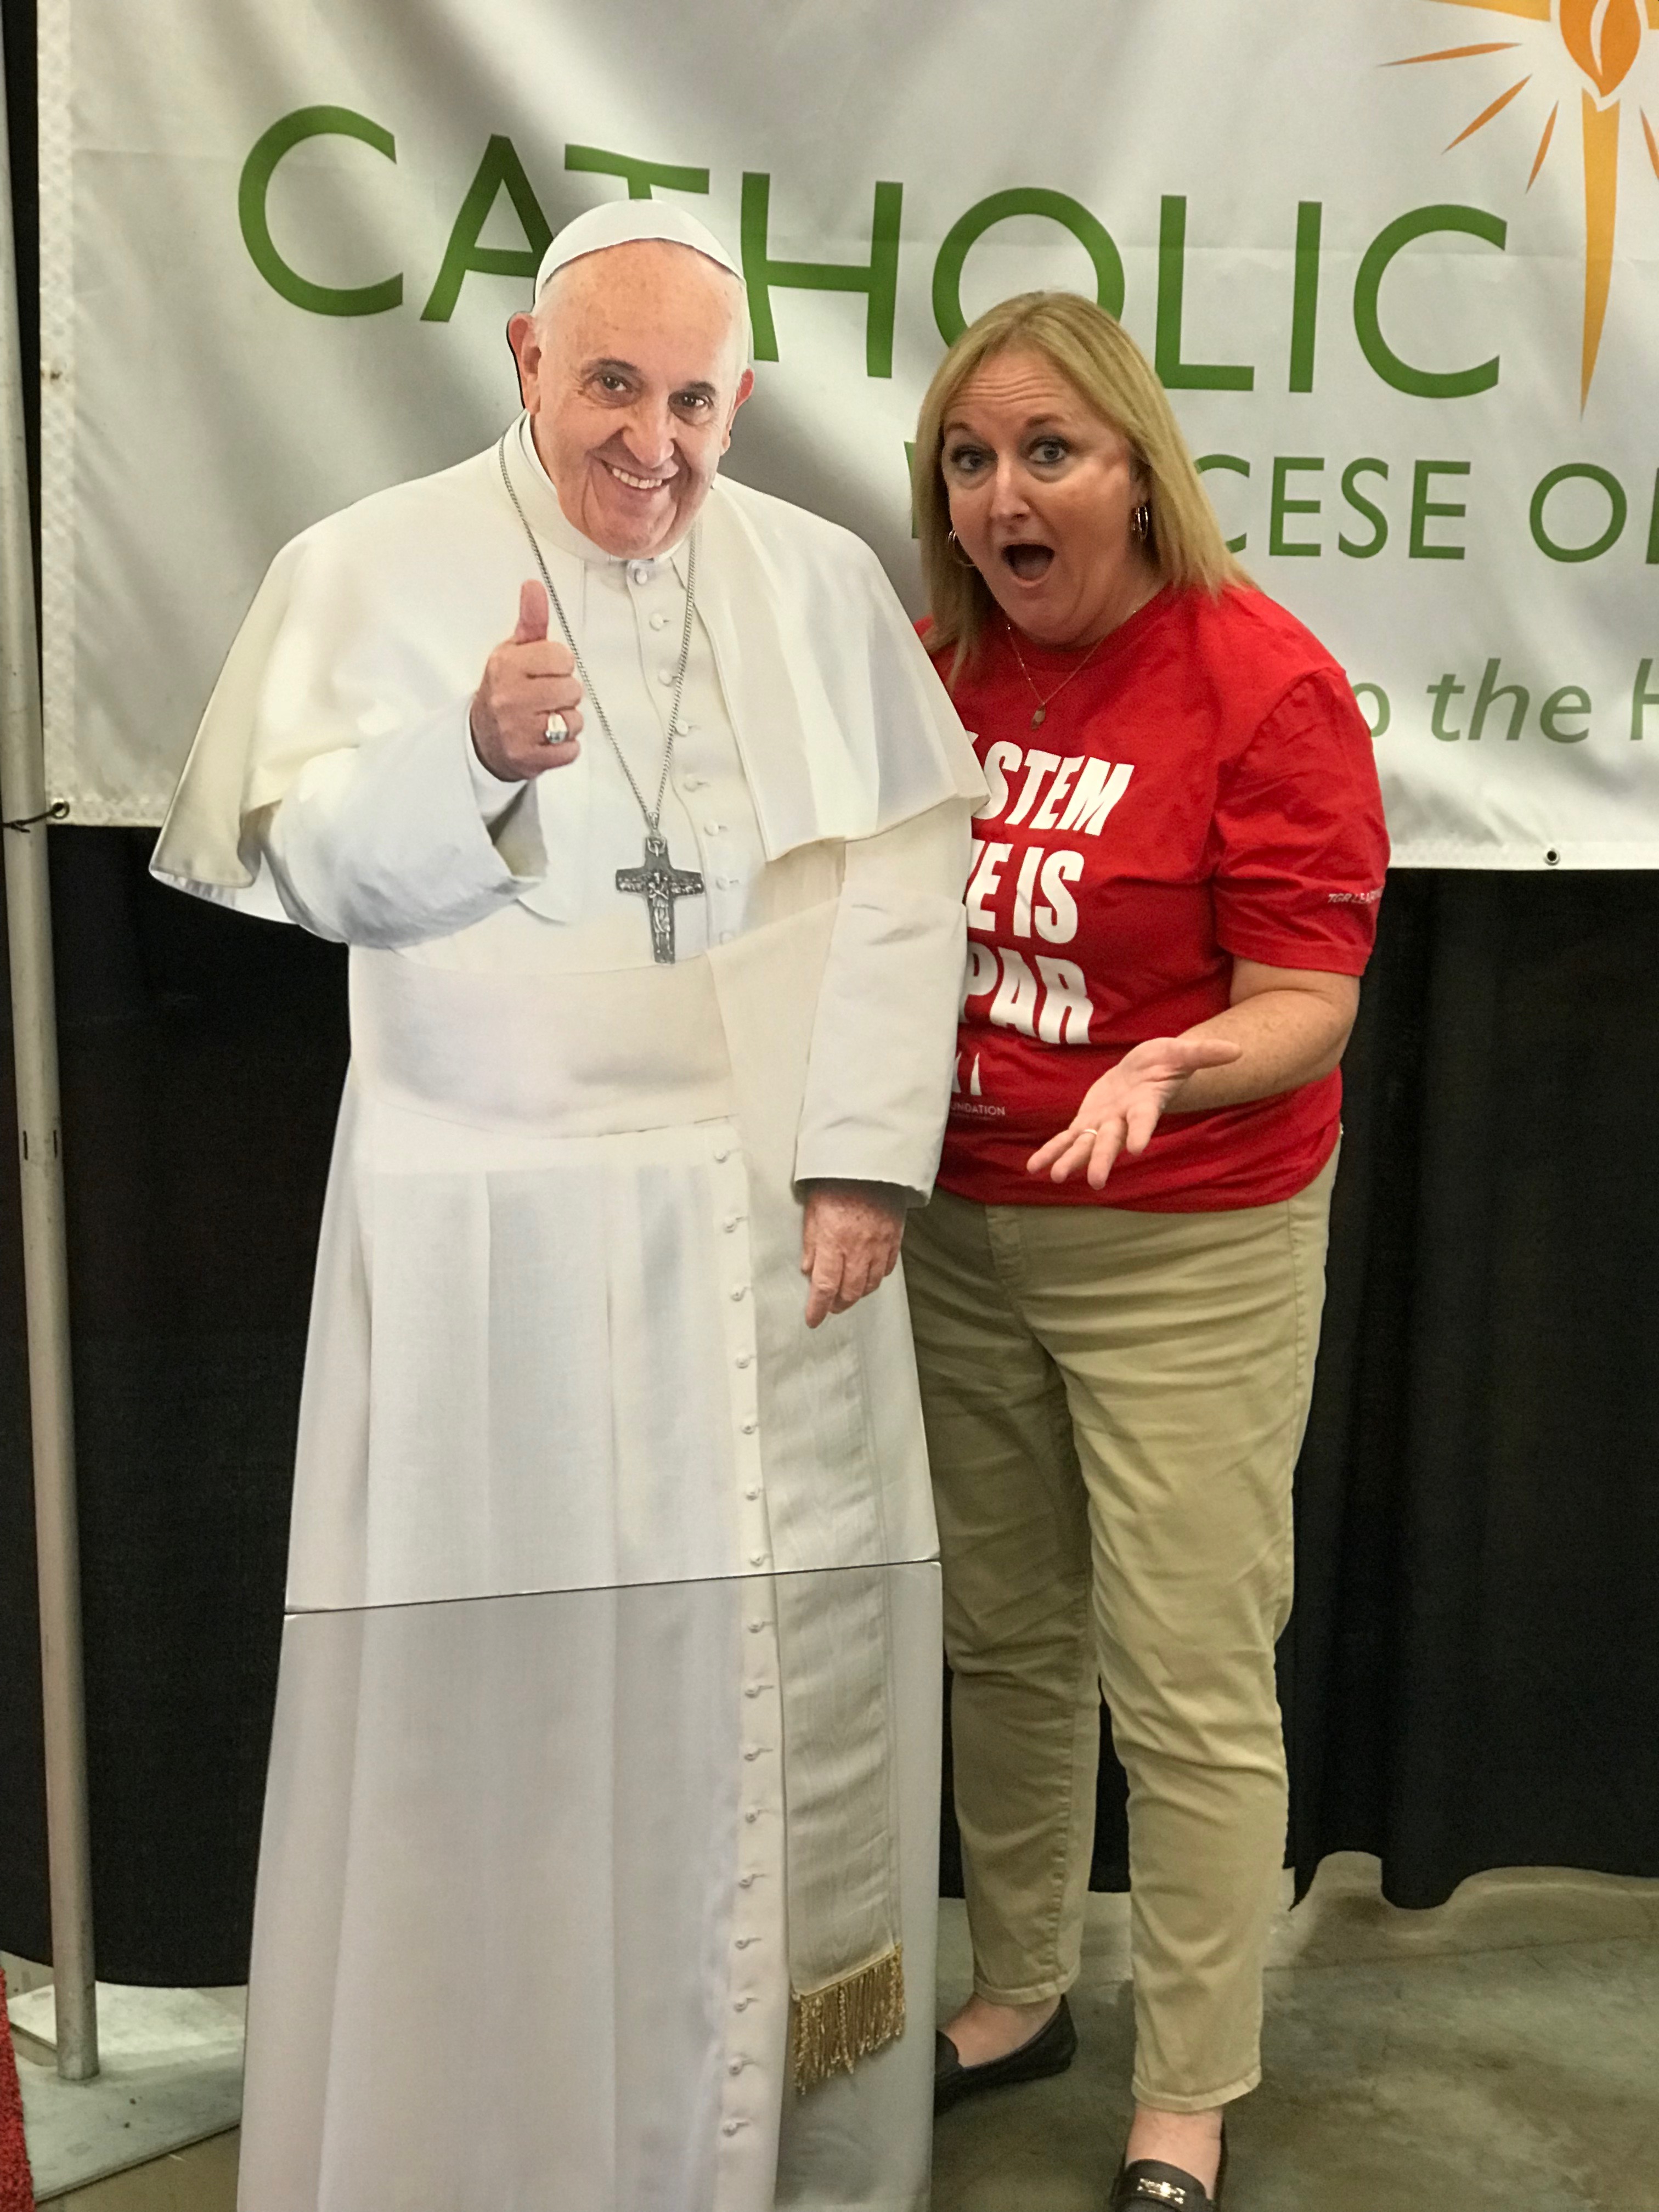 Picture with Dr. Kathy Bihr and cardboard cutout of Pope